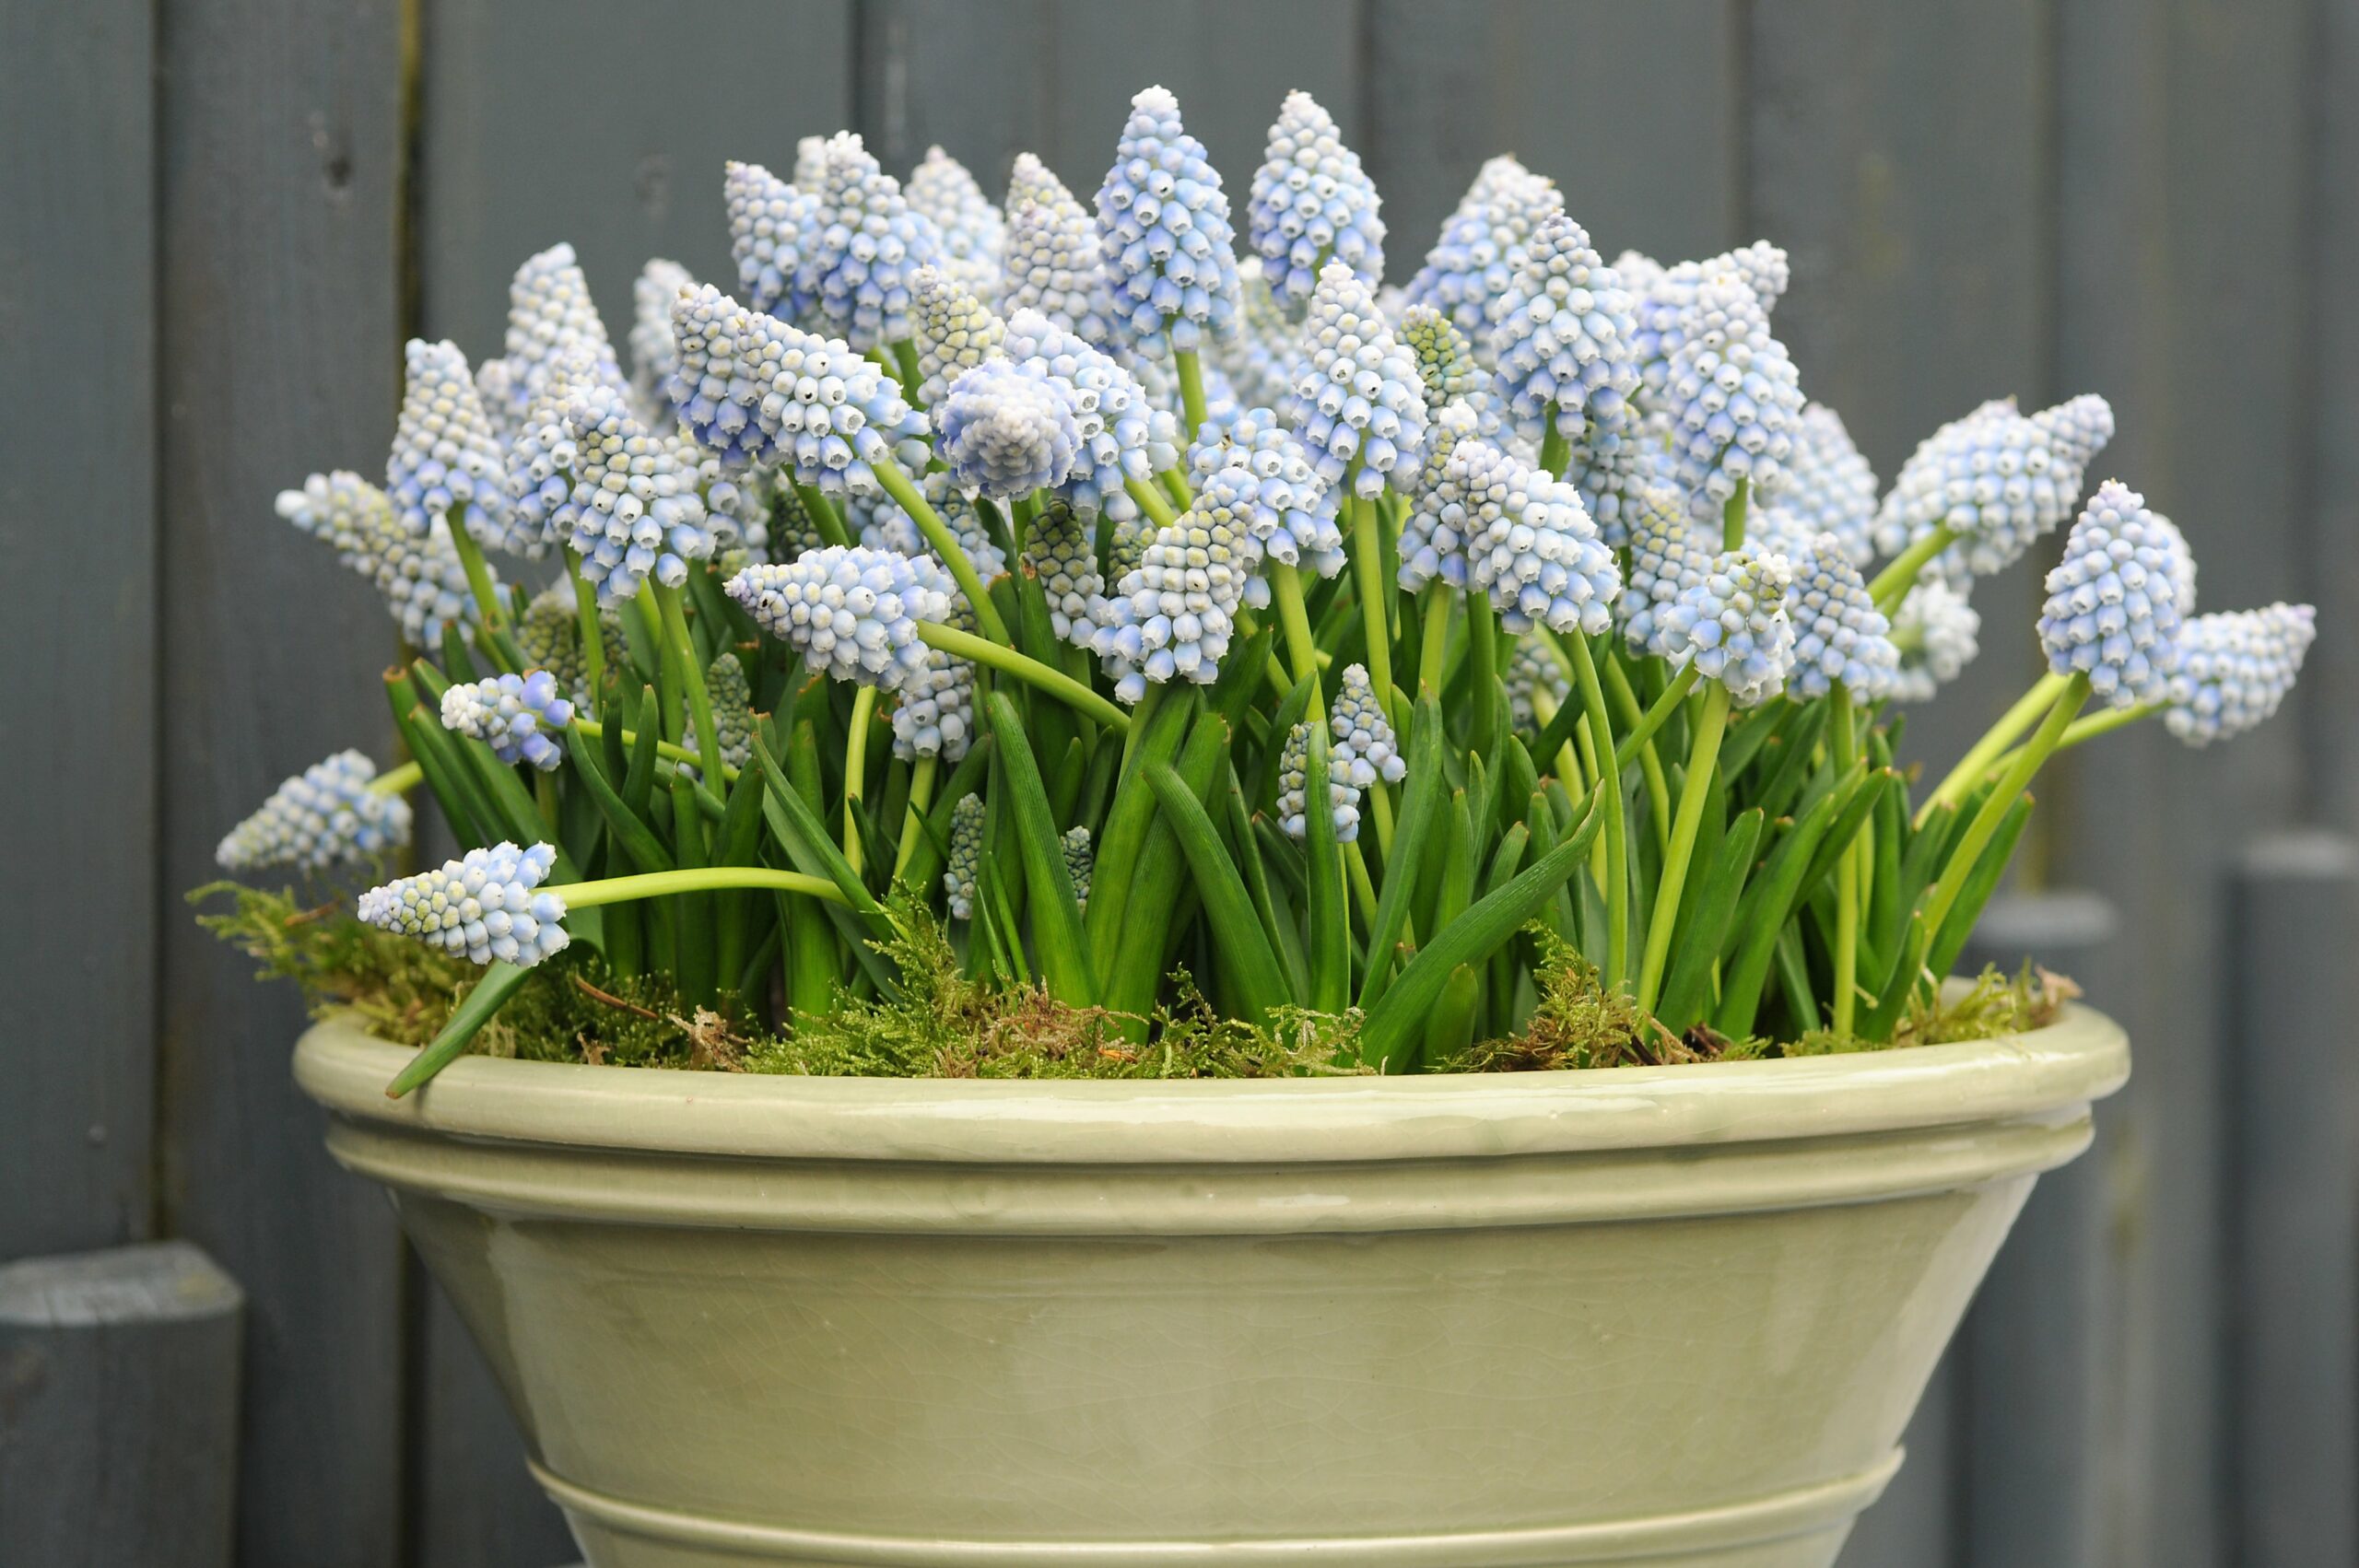 Grape Hyacinths planted in pots